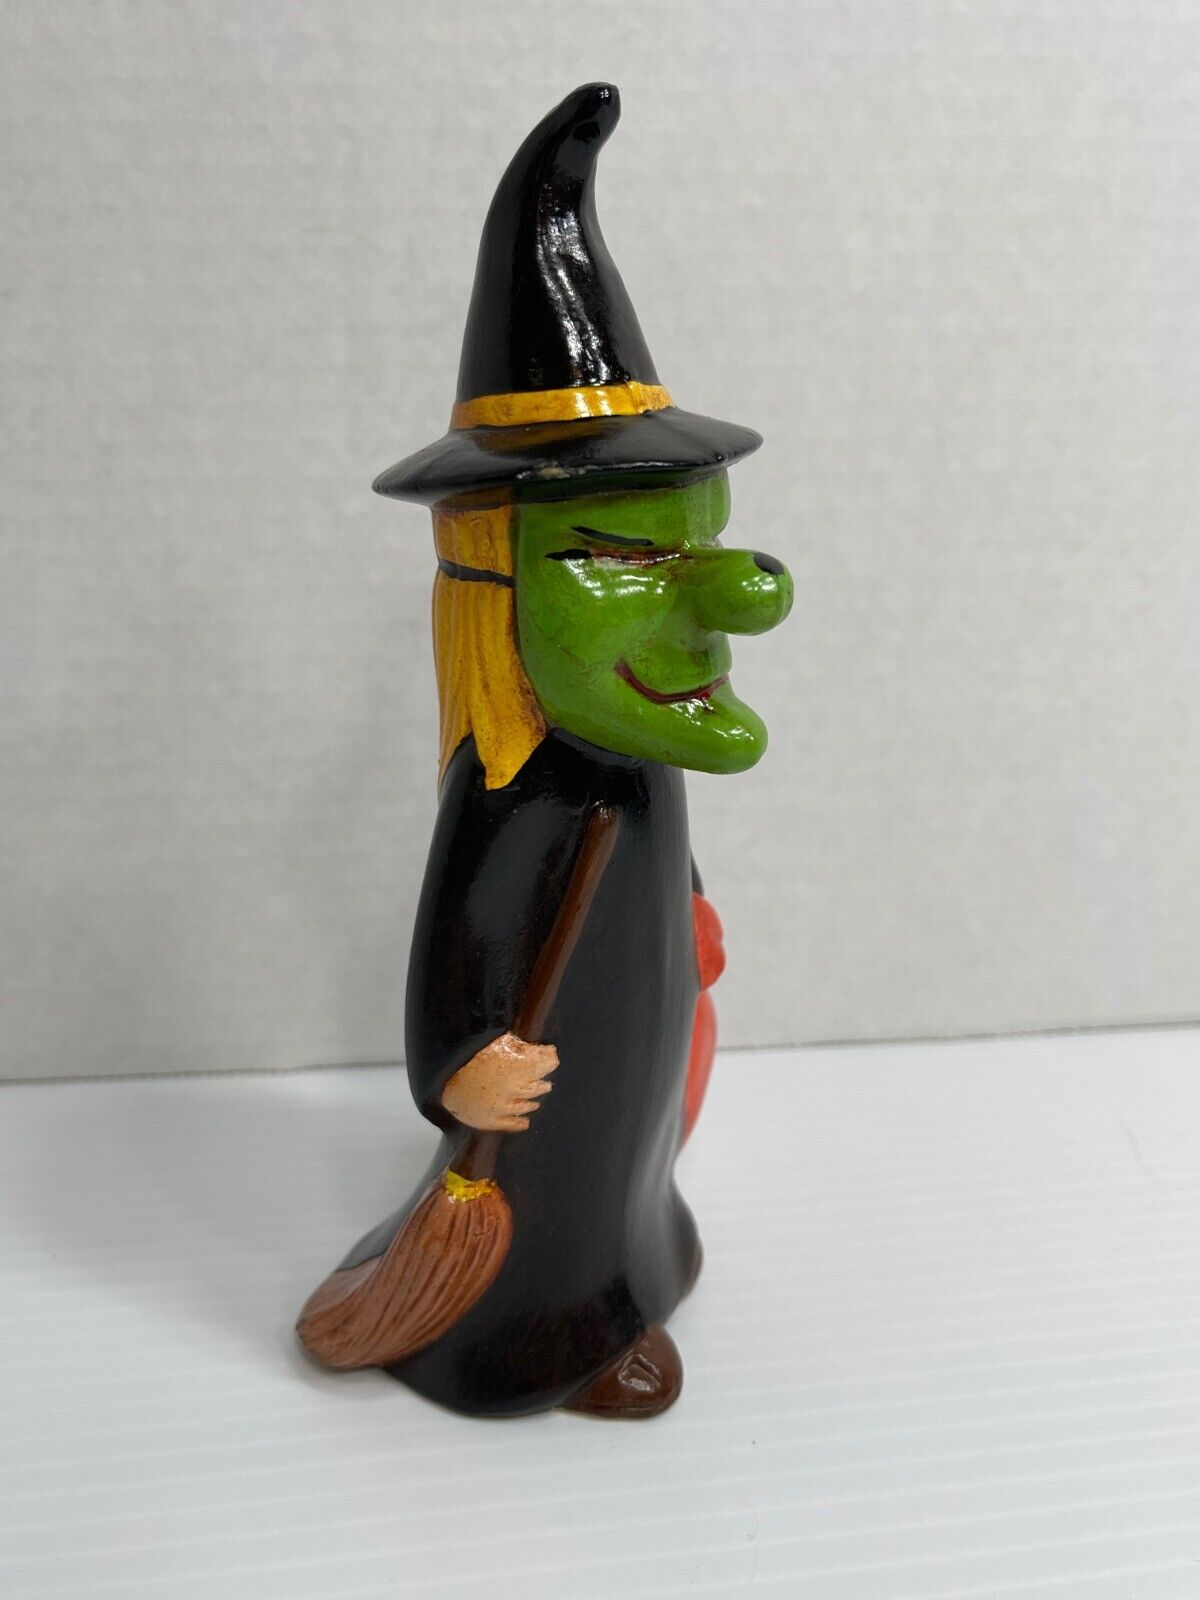 Vintage Halloween Witch Figurine - Ceramic Trick or Treating Witch Figure